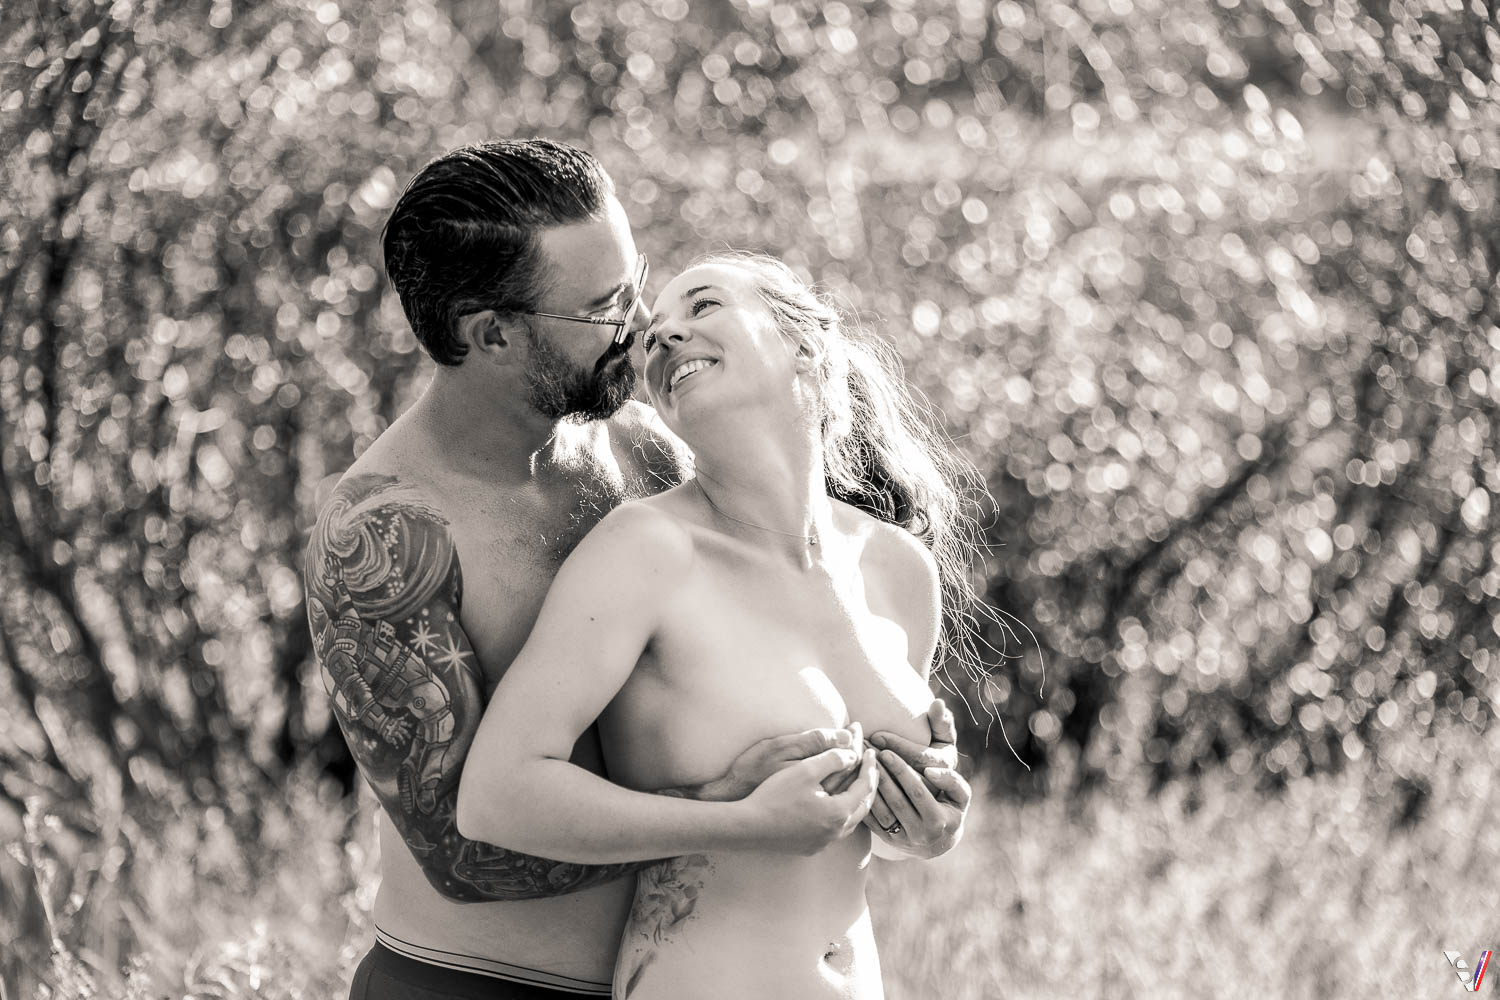 Fine nude art for couples is an amazing moment. And Alberta gives so many lovely backgrounds.